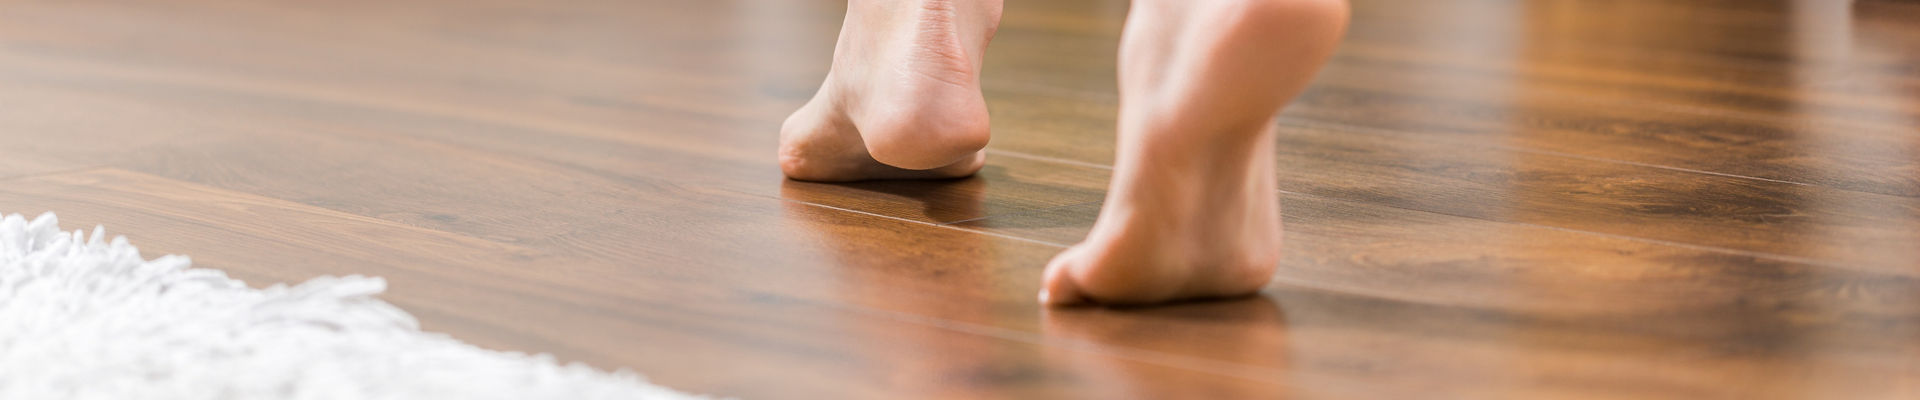 Person walking barefoot on floorboards